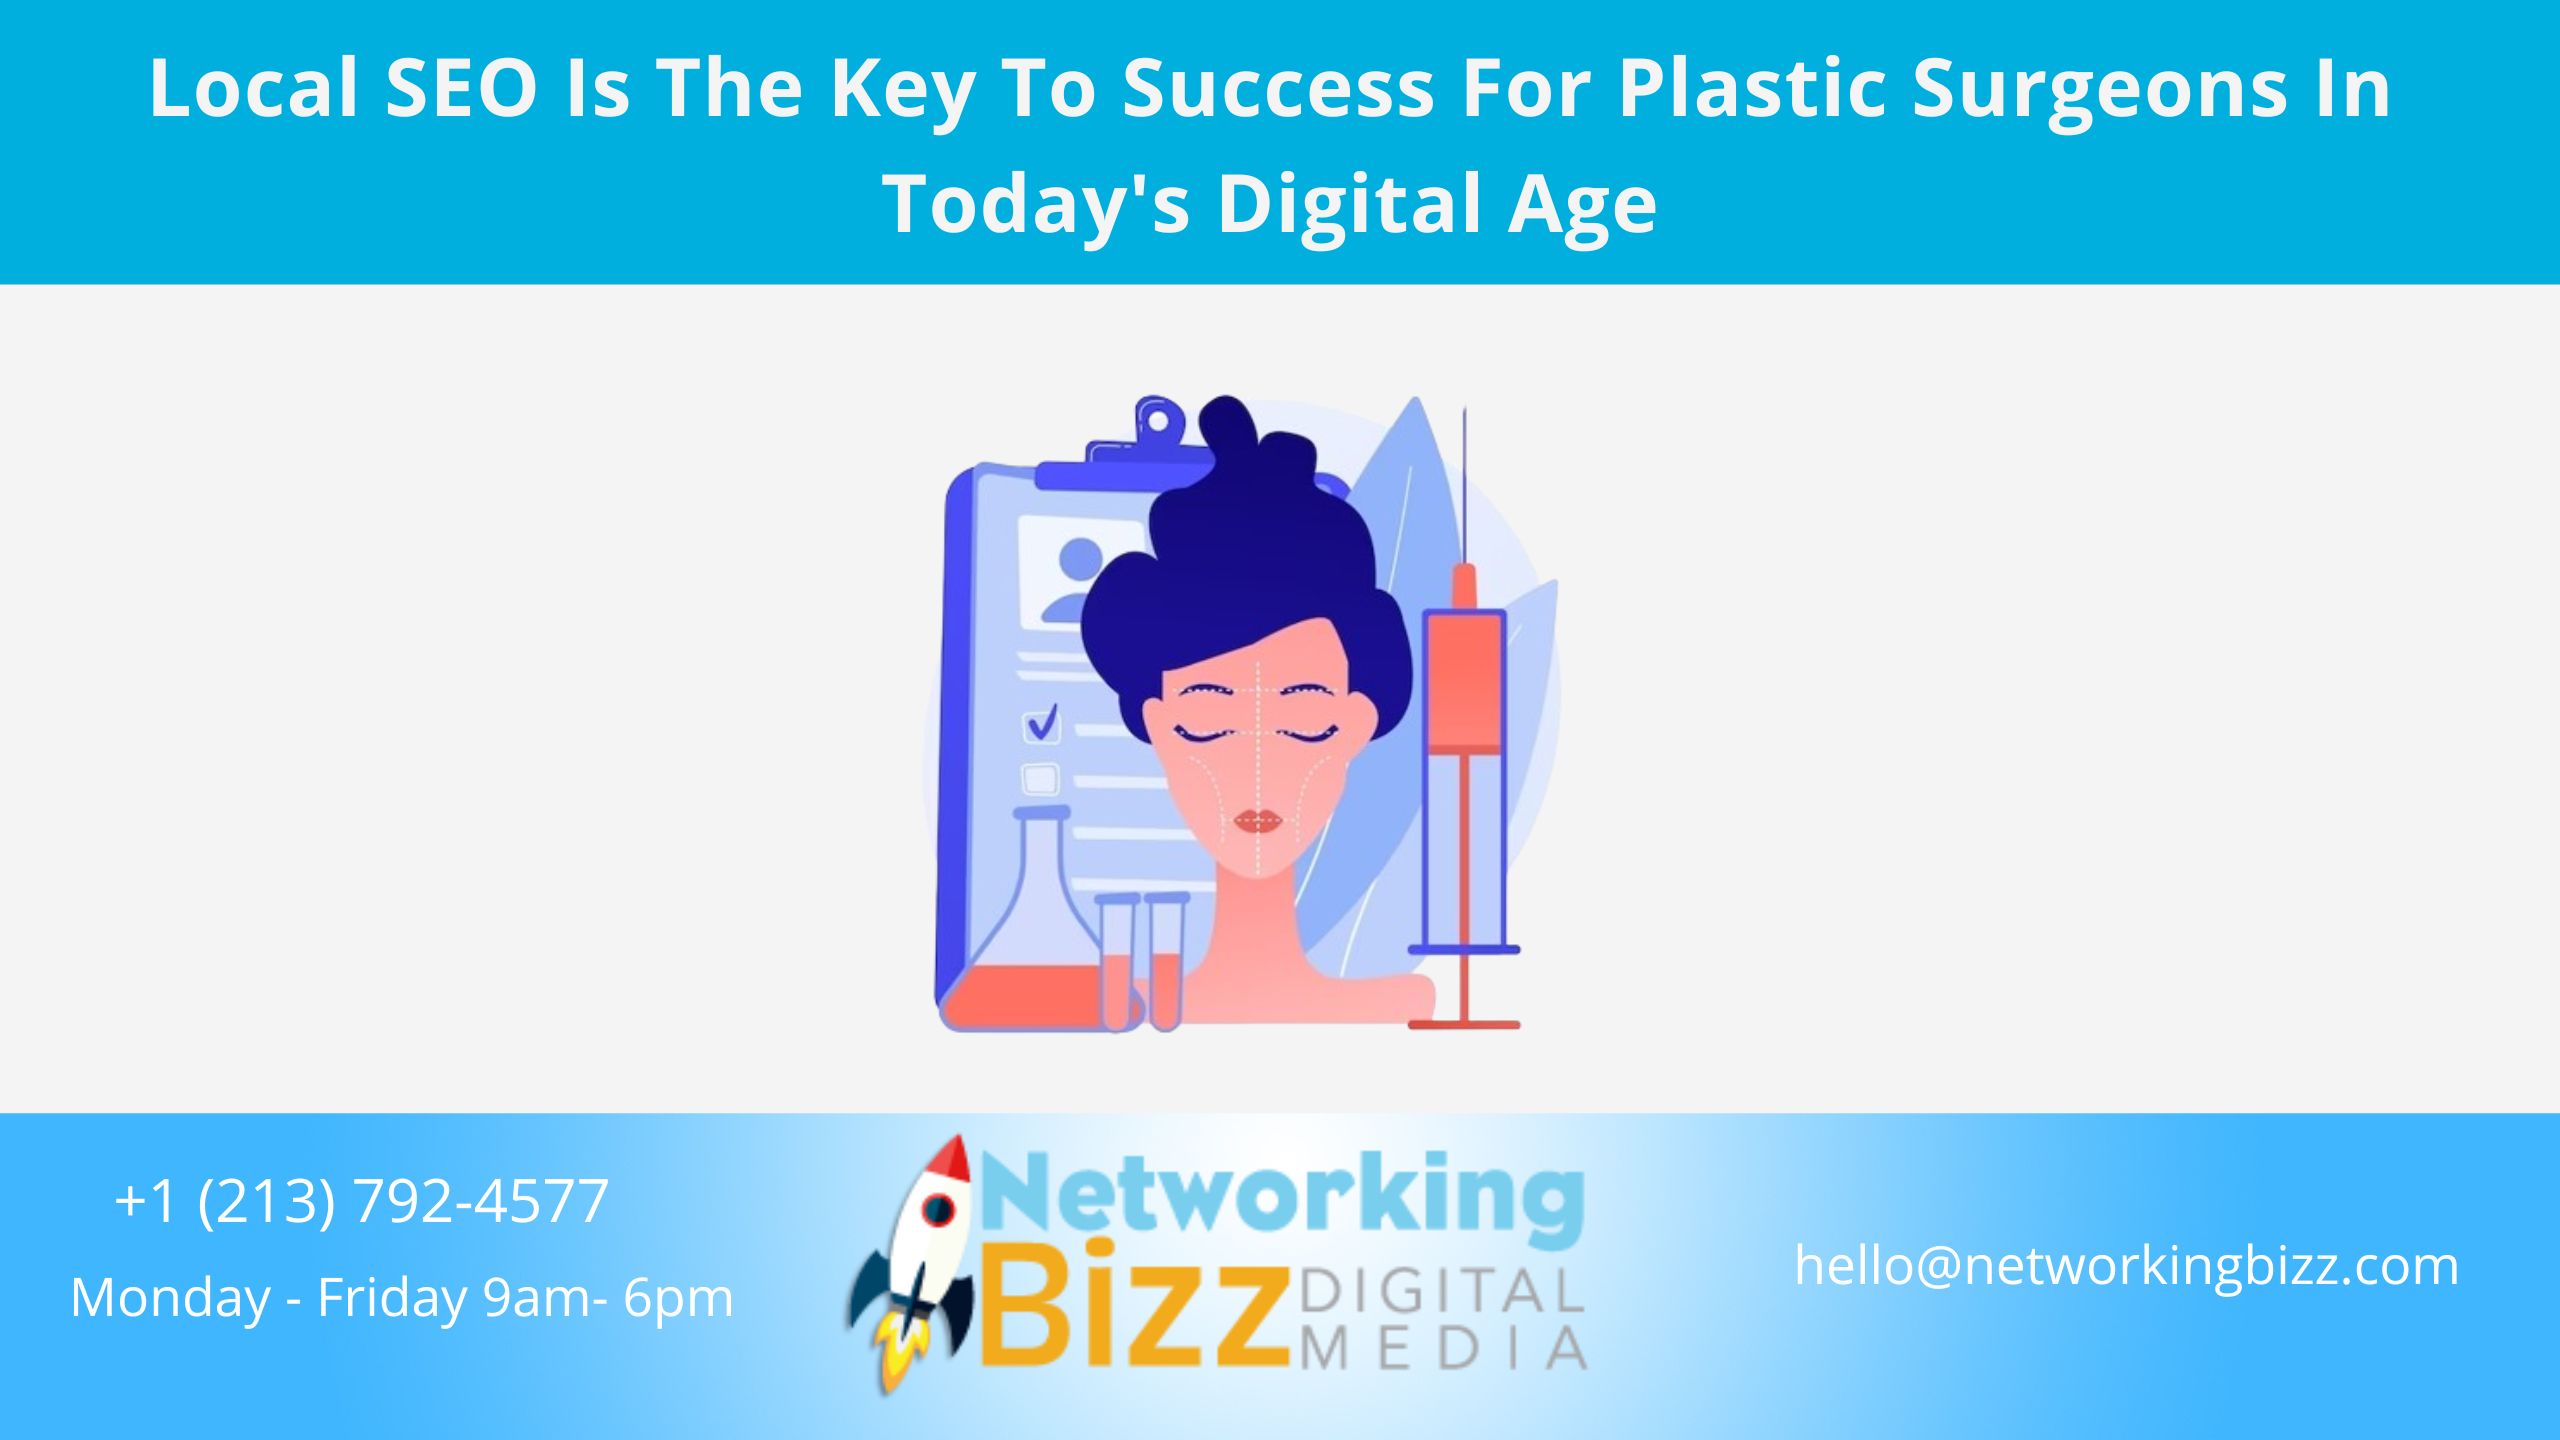 Local SEO Is The Key To Success For Plastic Surgeons In Today’s Digital Age